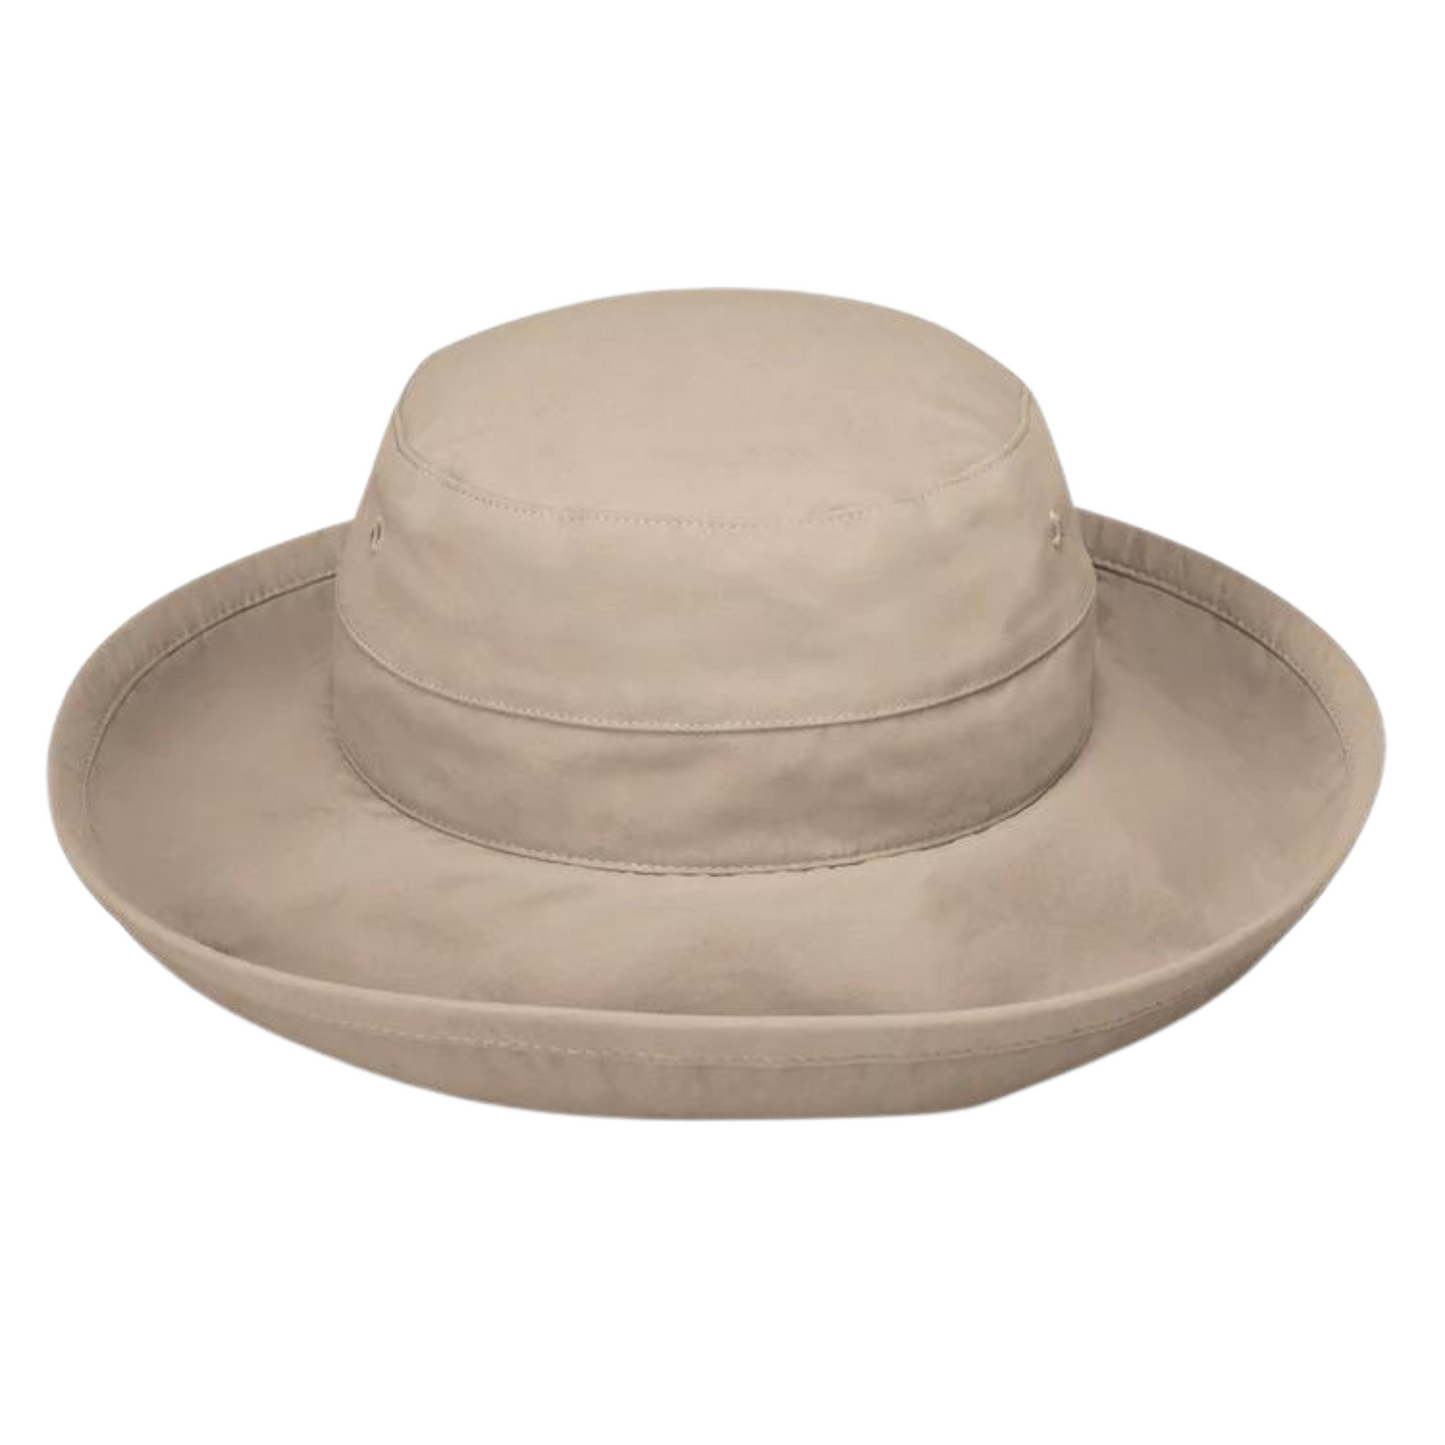 Tan hat pictured from the front featuring a turned up brim and uniform coloured band in the centre that is emphasized with stitch detail.